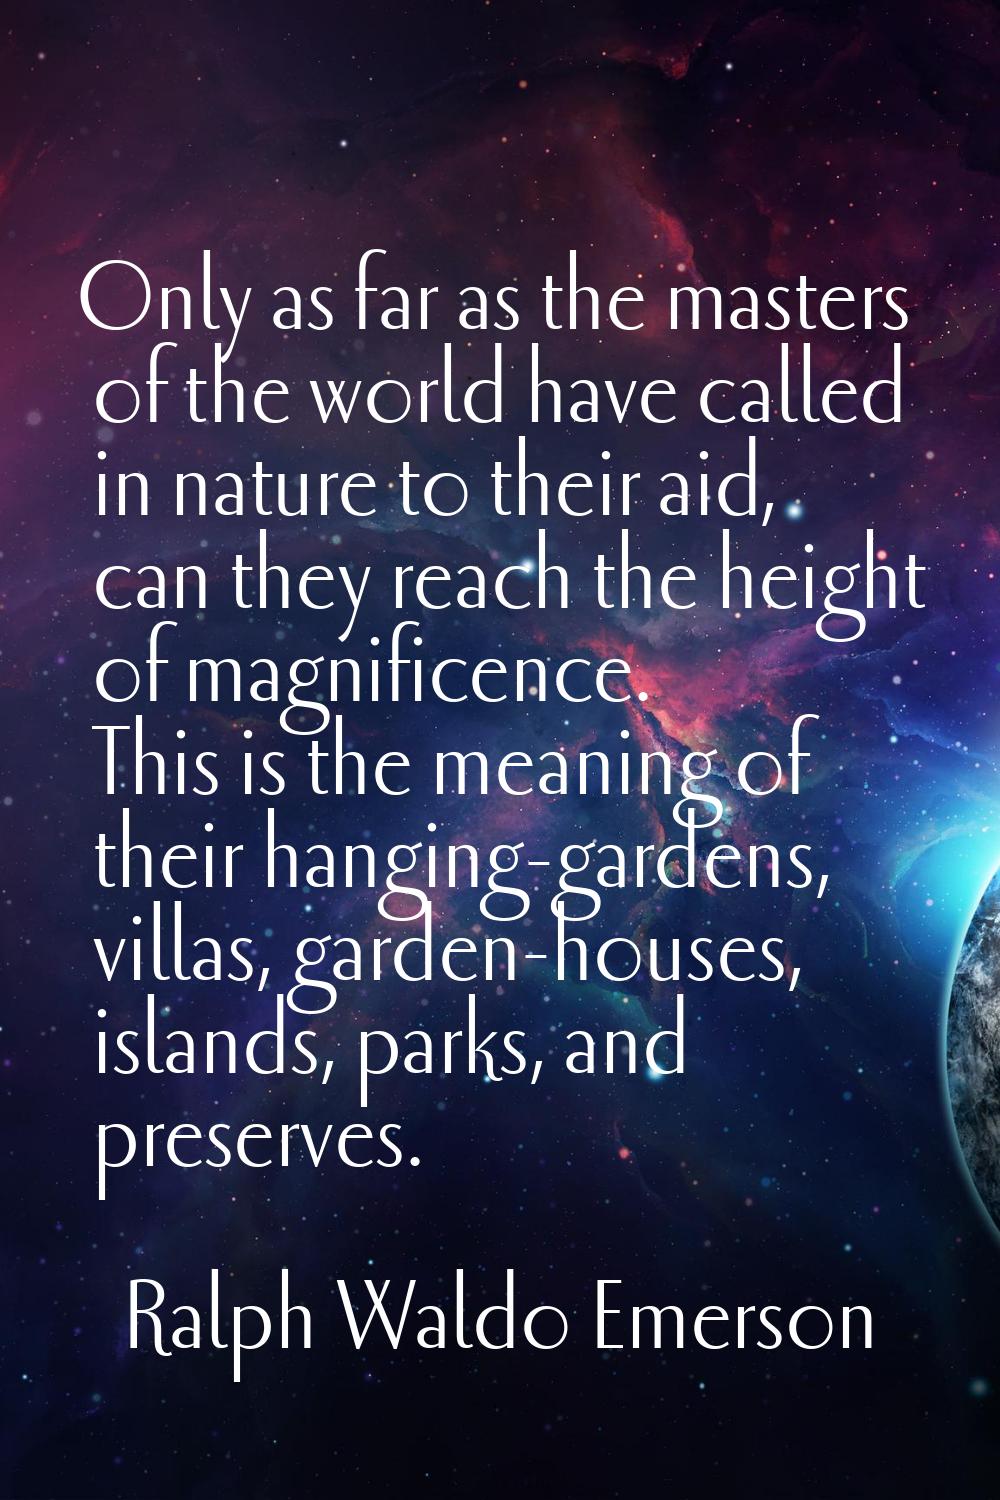 Only as far as the masters of the world have called in nature to their aid, can they reach the heig